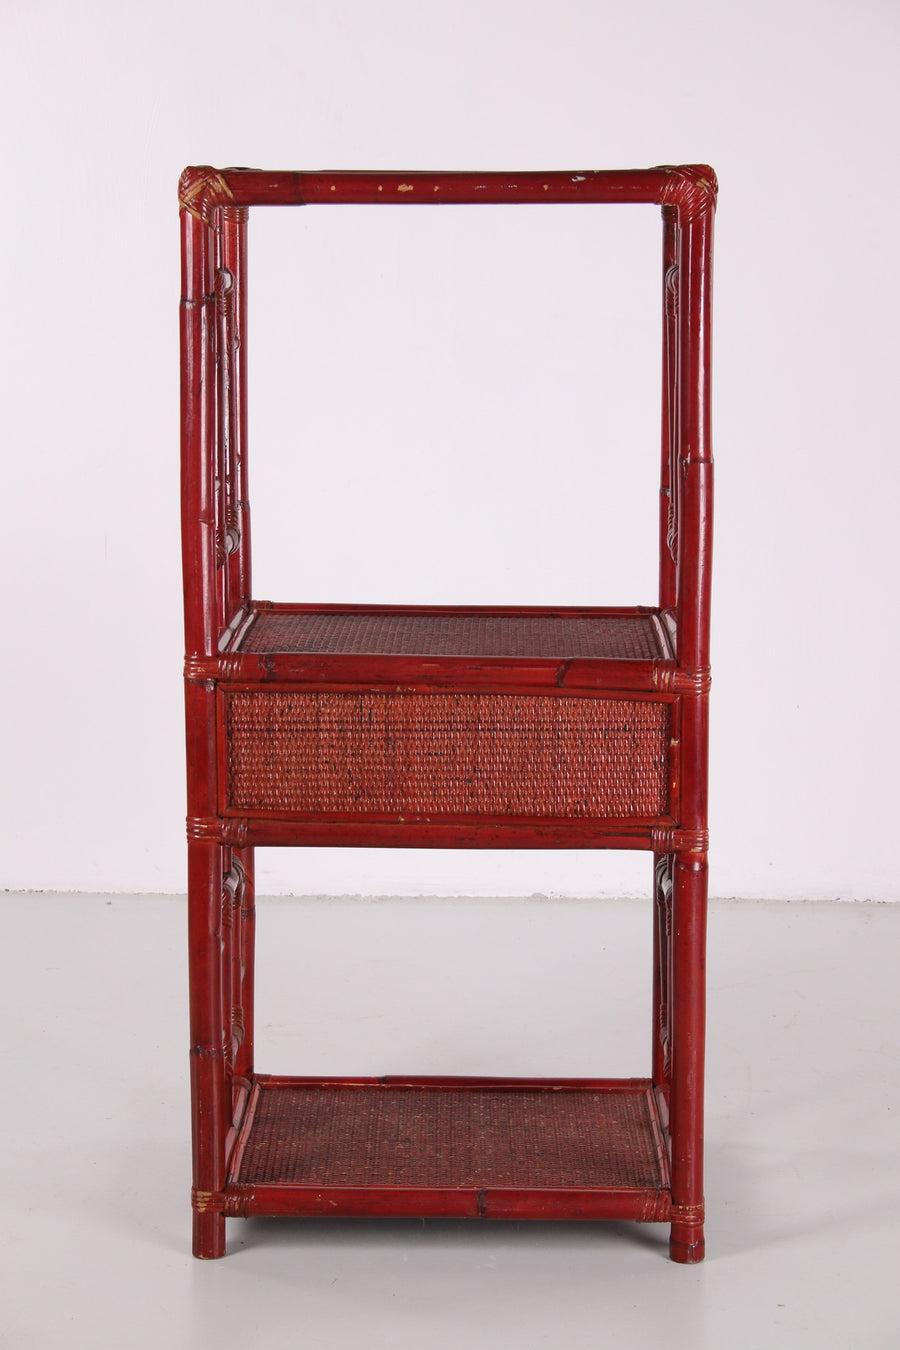 Chinese Export Chinese Etagere or Room Divider of Bamboo in Old Red, 19th Century